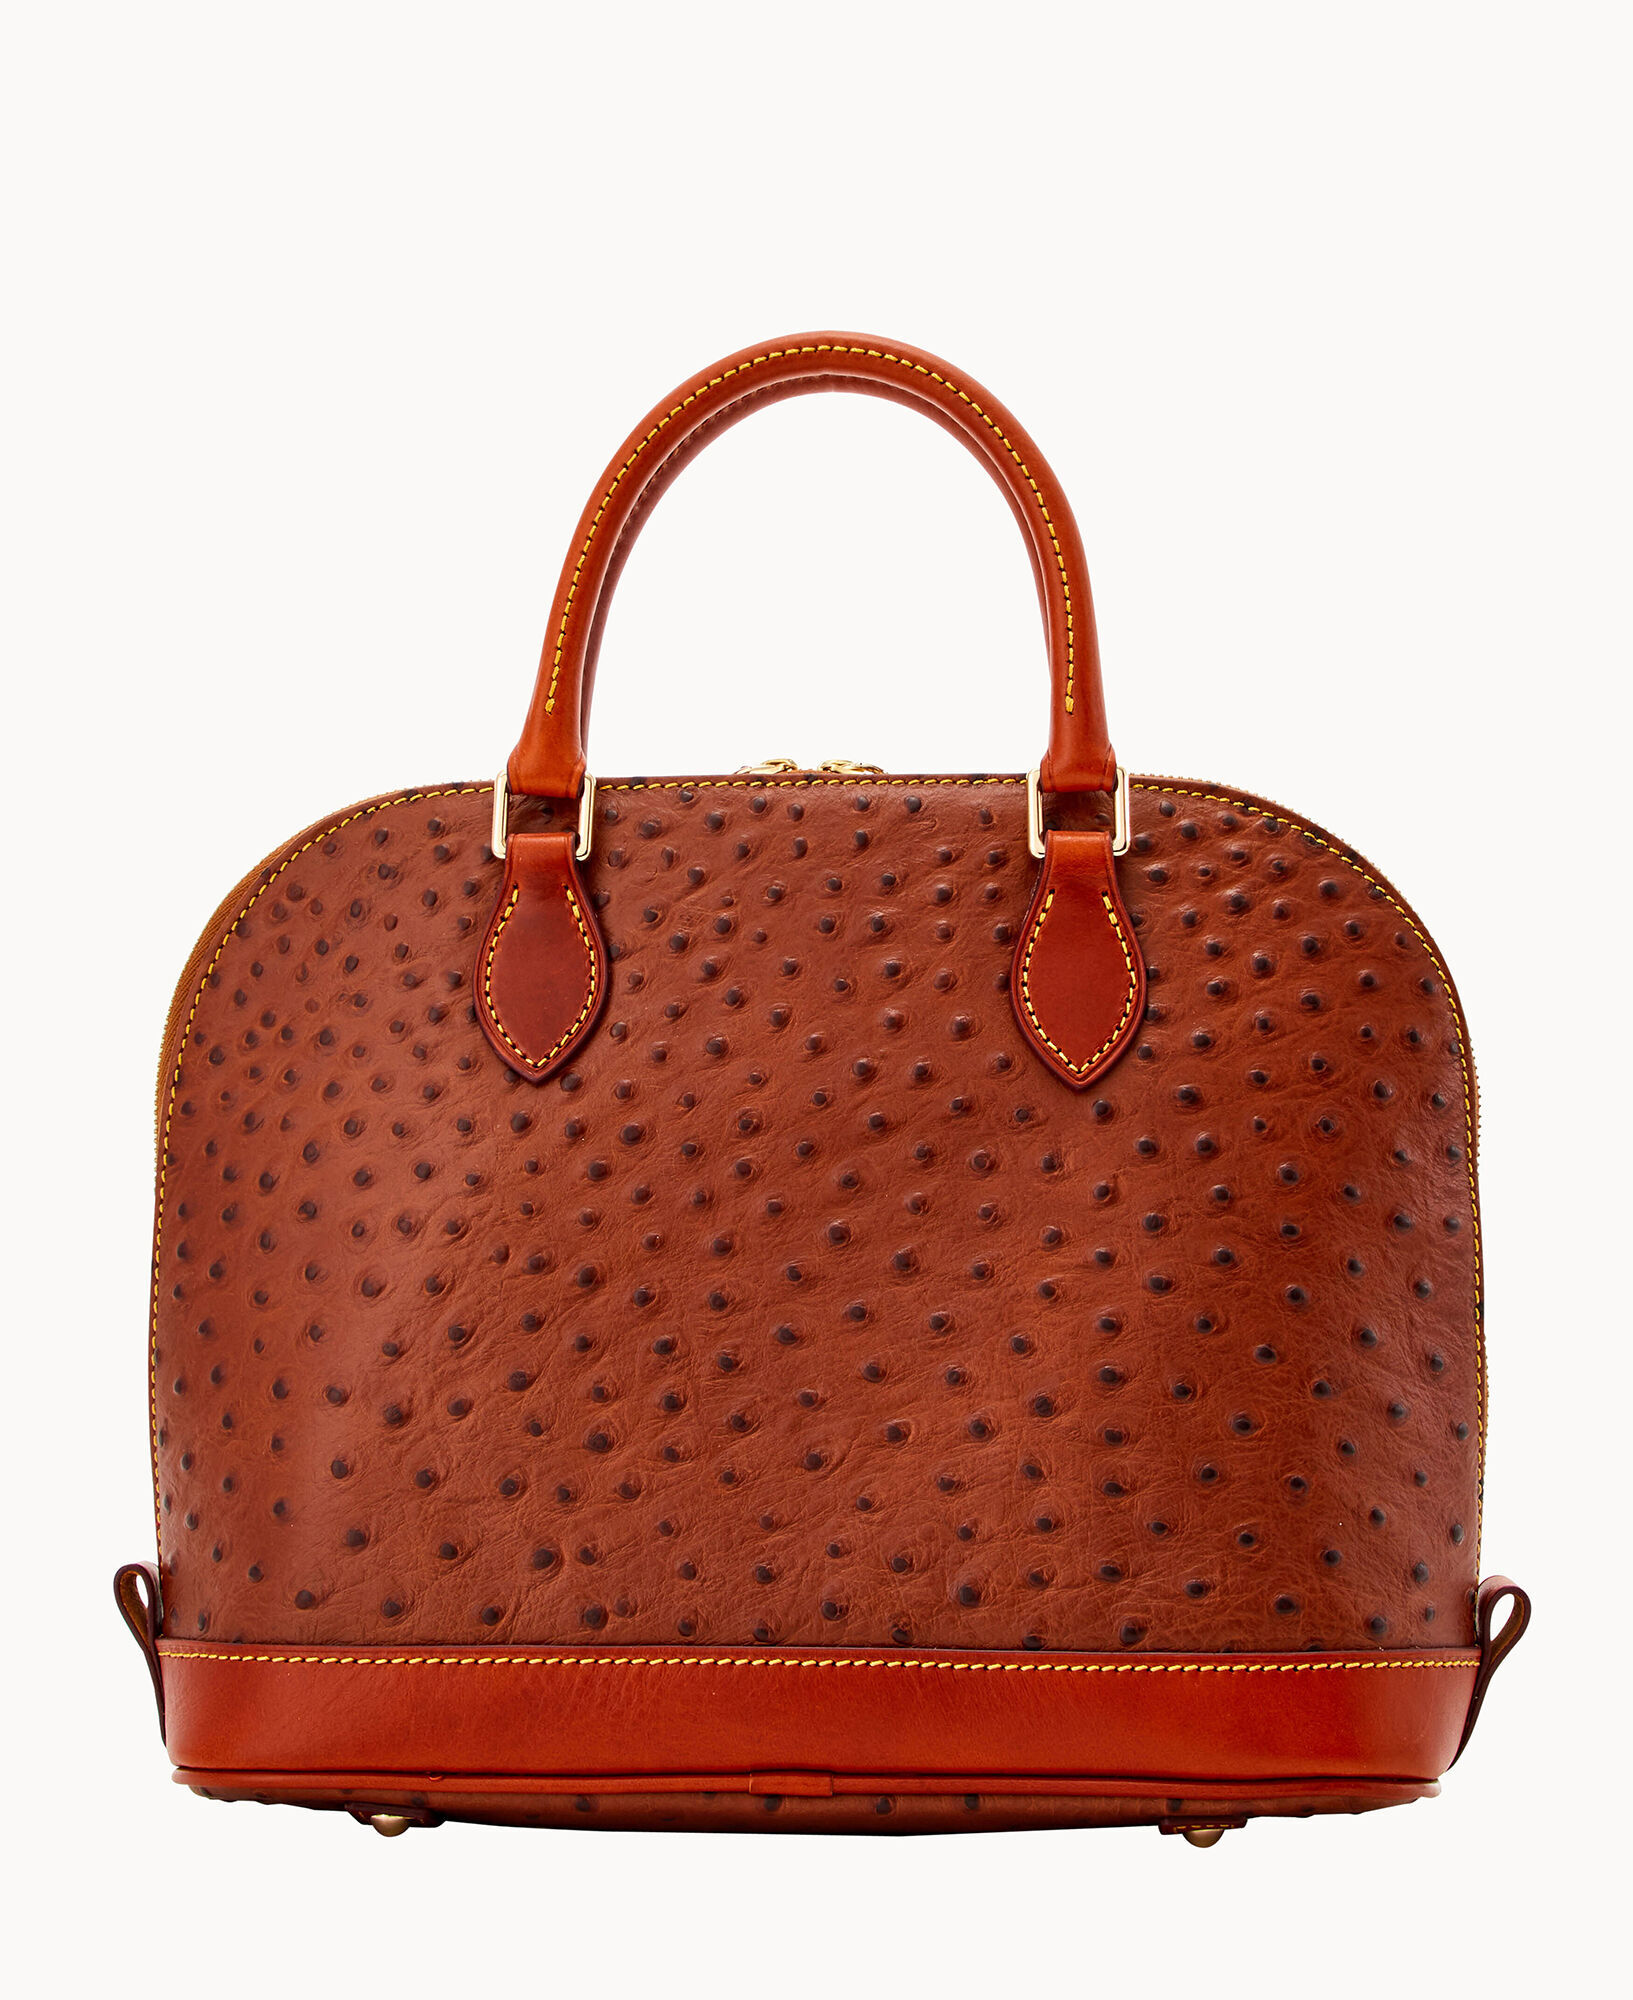 Don't care for the bag charm, but I LOVE the color of the patina on this  bag. Louis Vuitton Speedy Bag